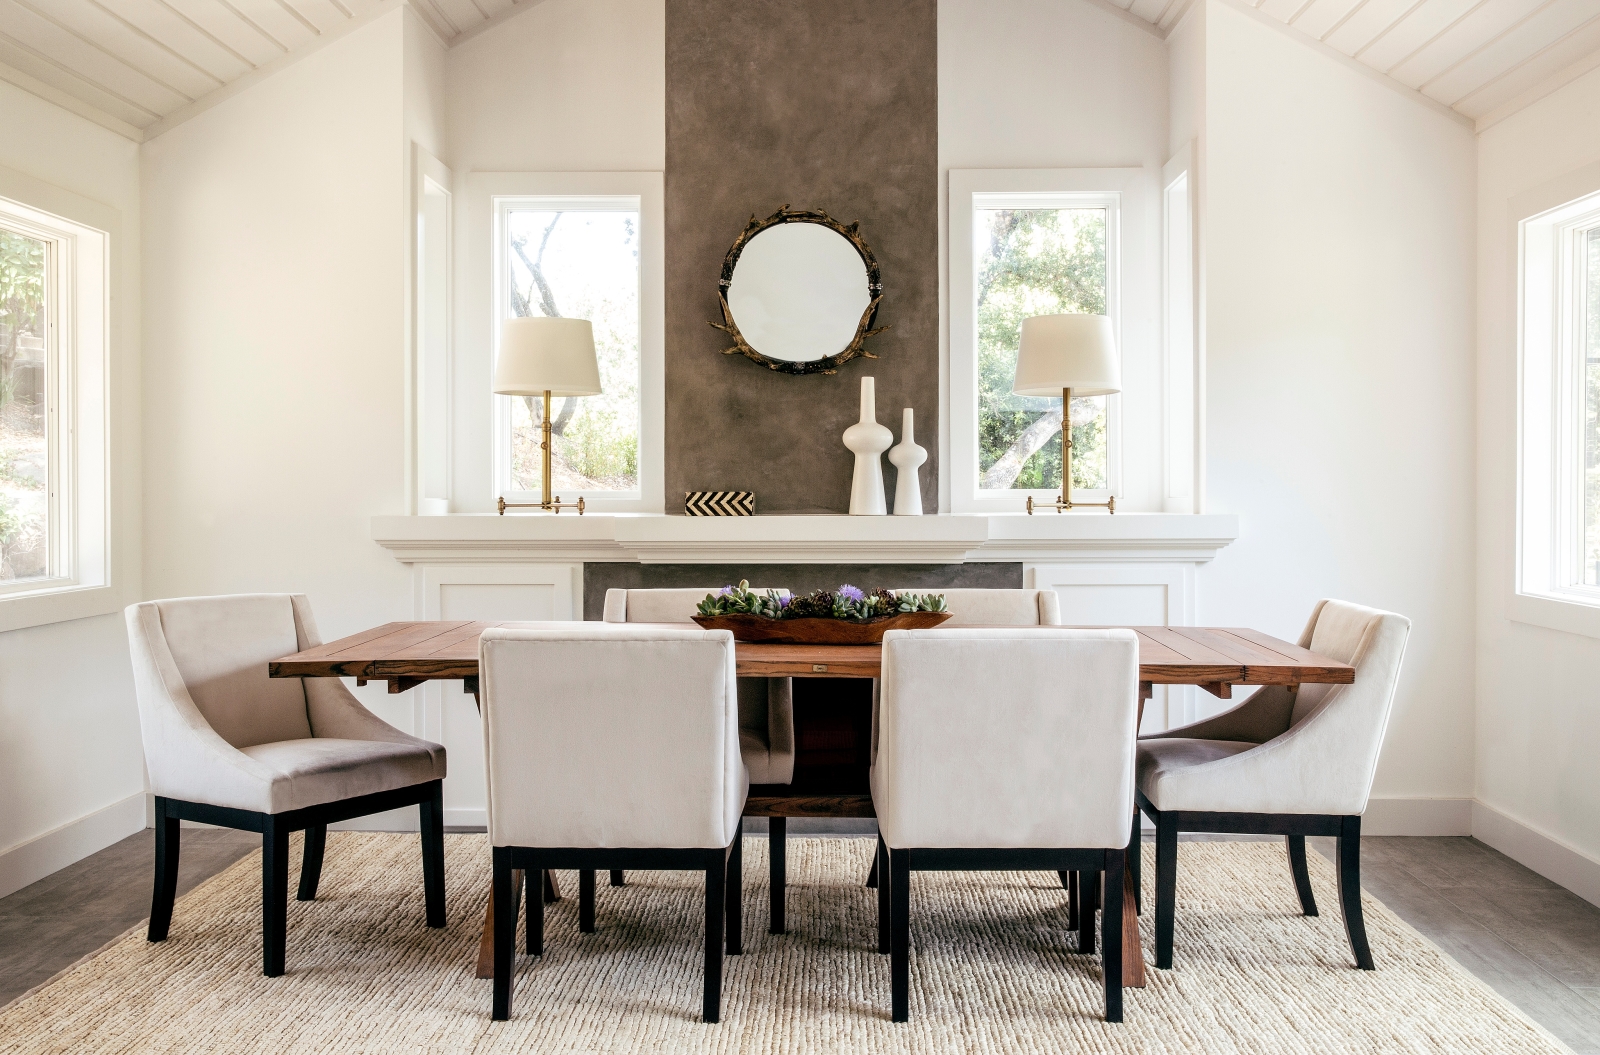 Transitional Style - Tips On Transitional Room Design | Zillow Digs